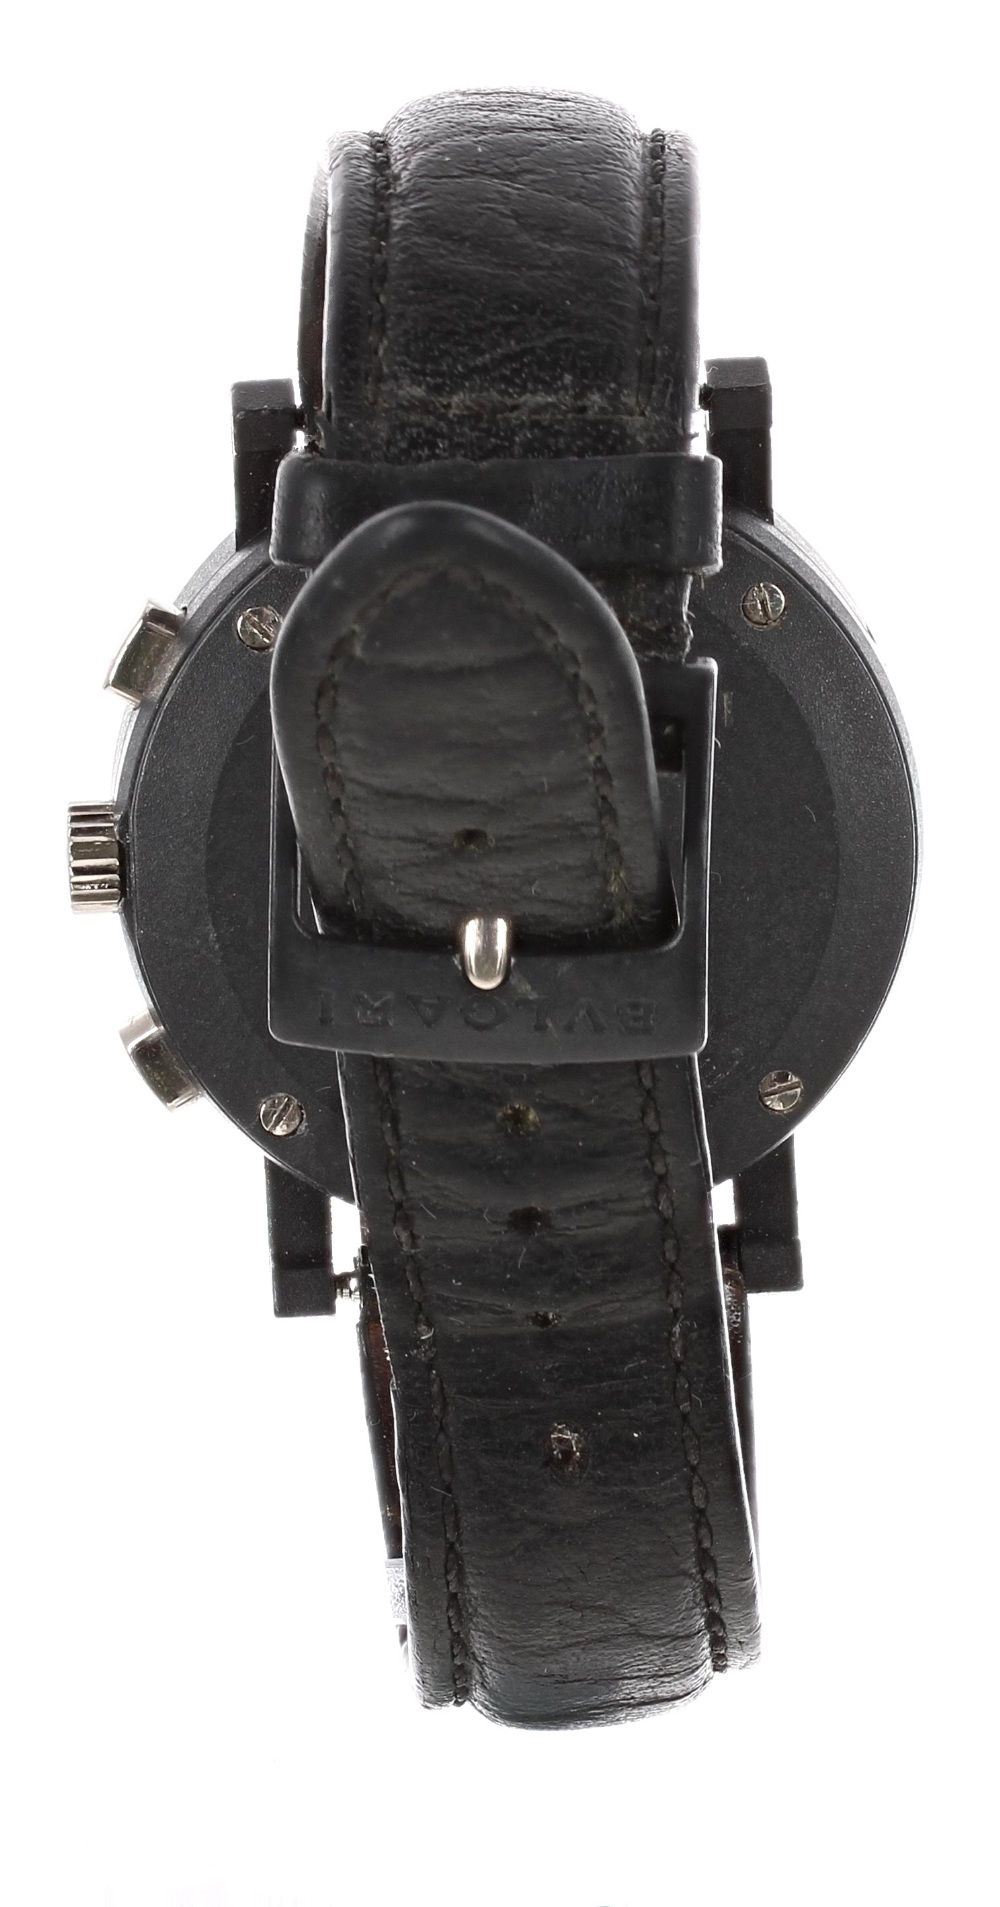 Bvlgari Carbongold Cortina chronograph carbon gentleman's wristwatch, ref. BB 38 CL CH, no. 840/999, - Image 4 of 5